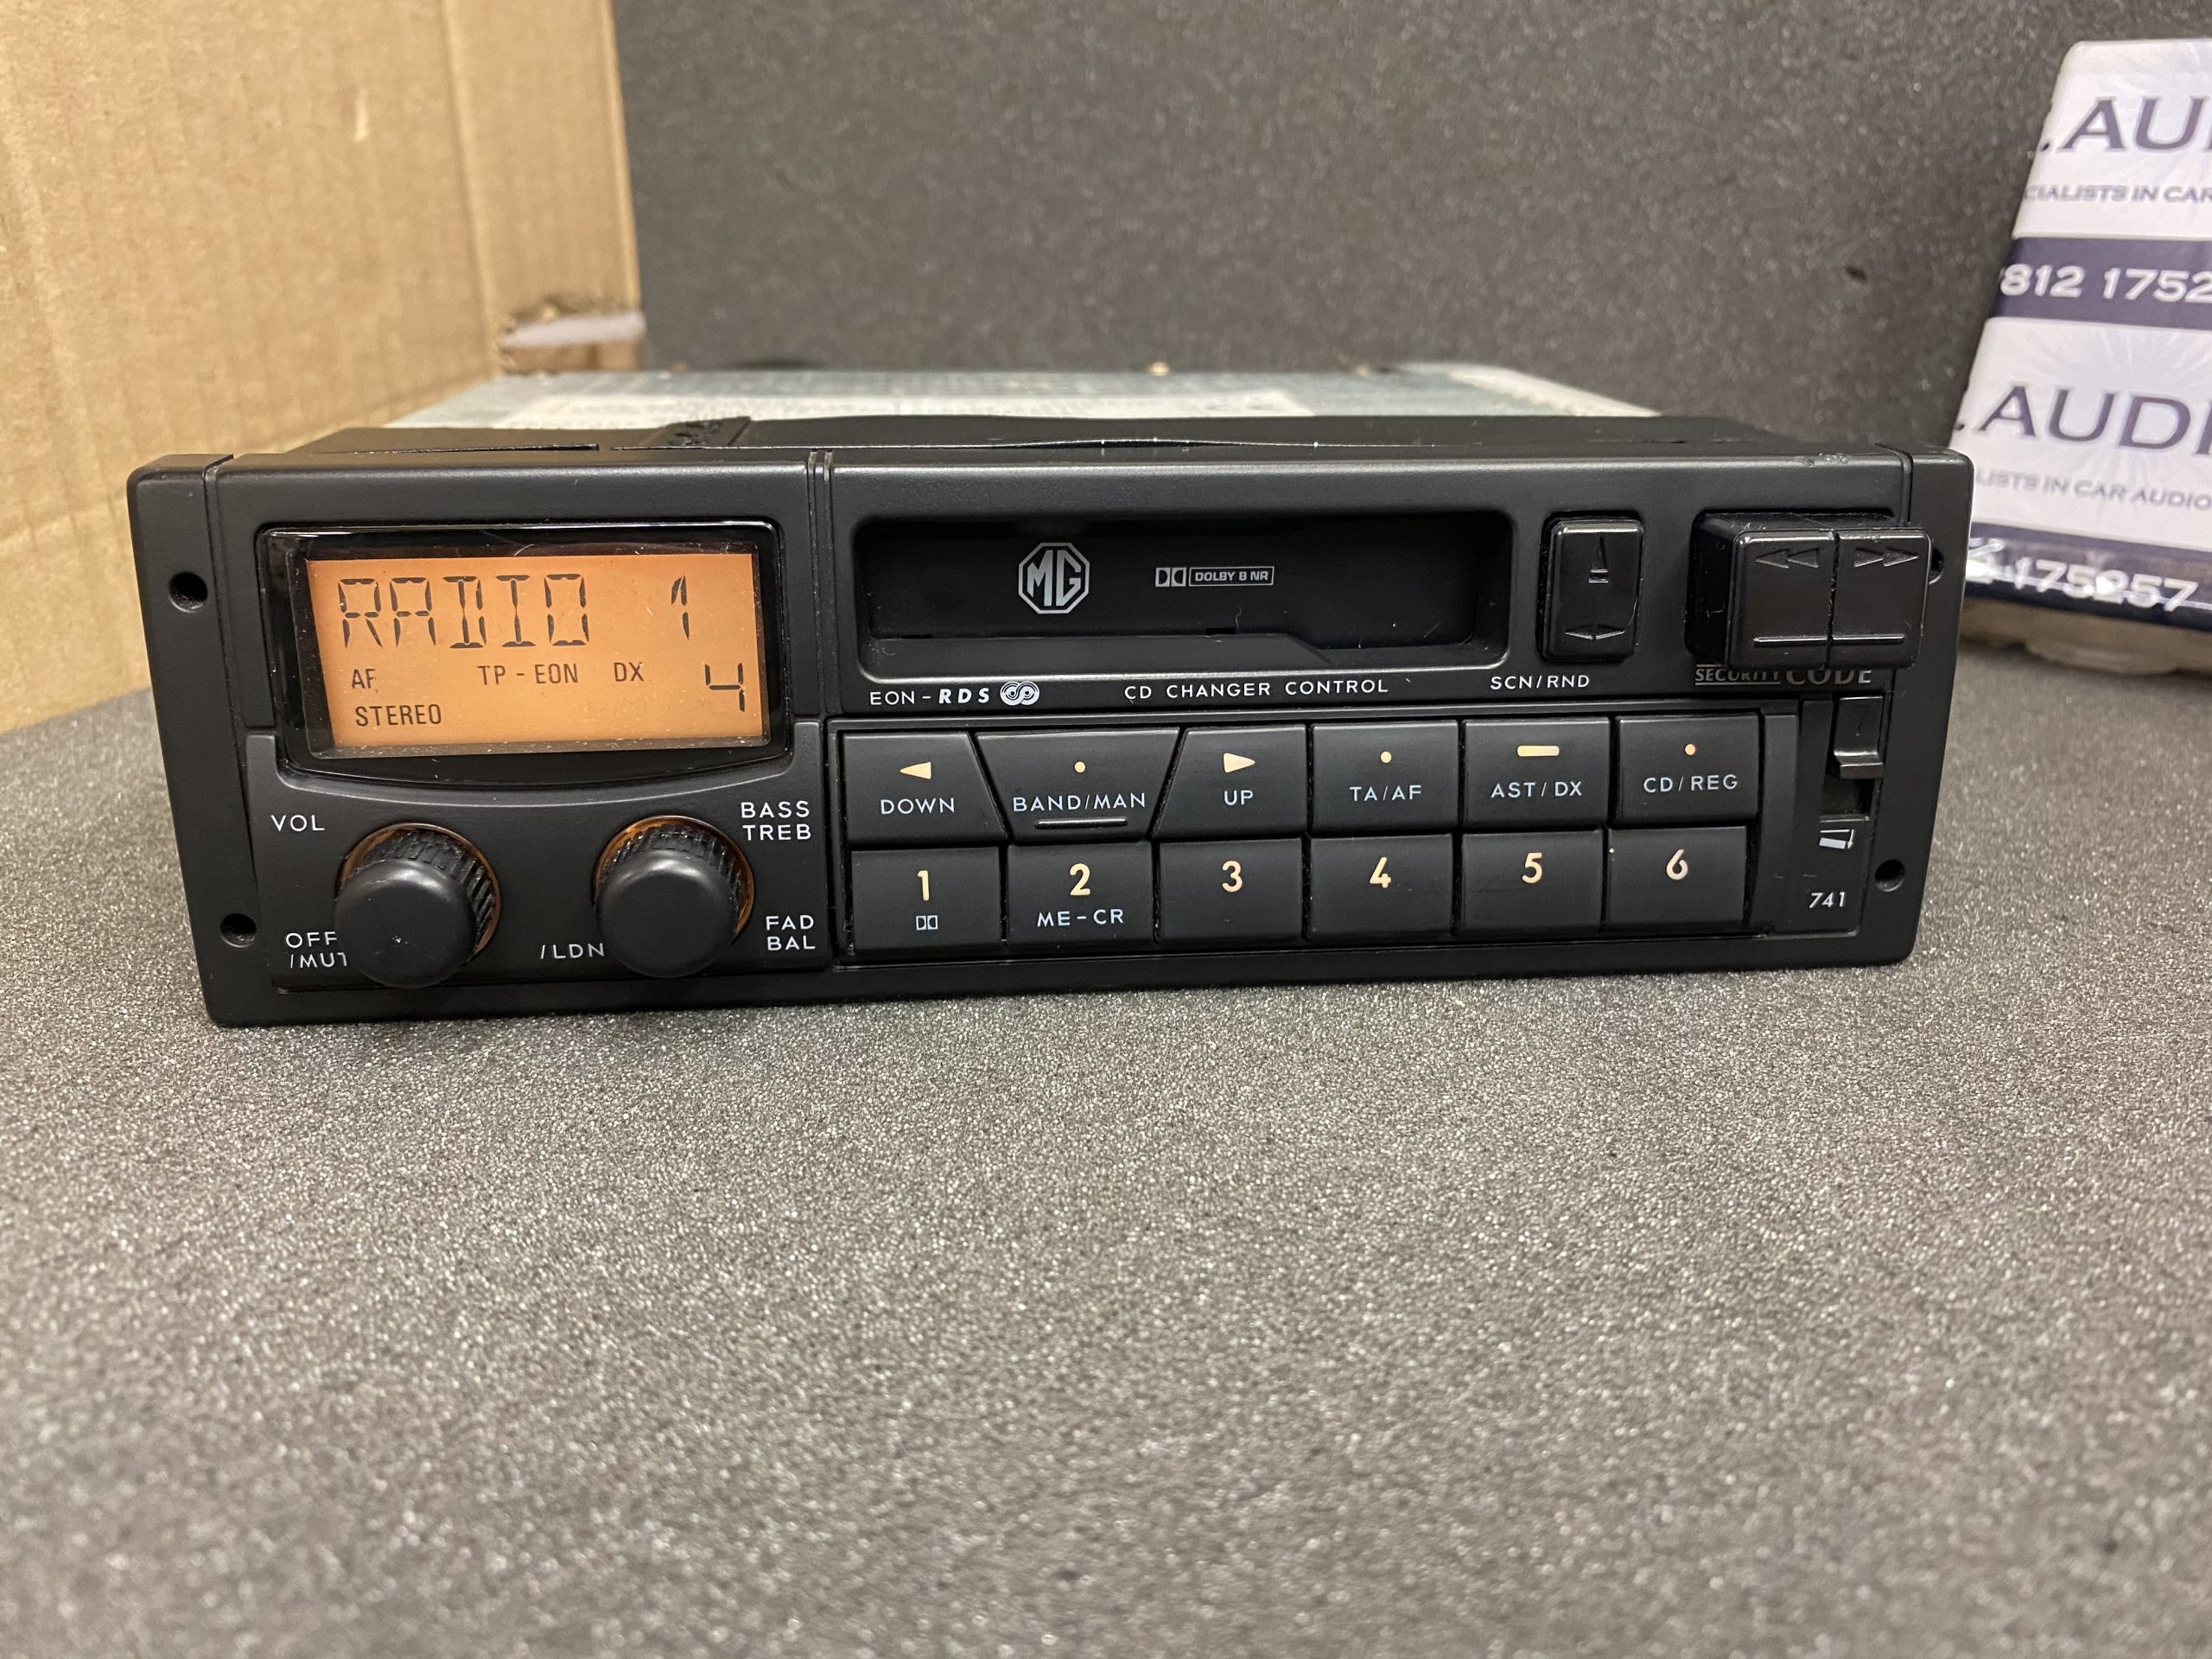 Old Rover Mg 741 Car Radio Stereo Cd Changer Control Audio